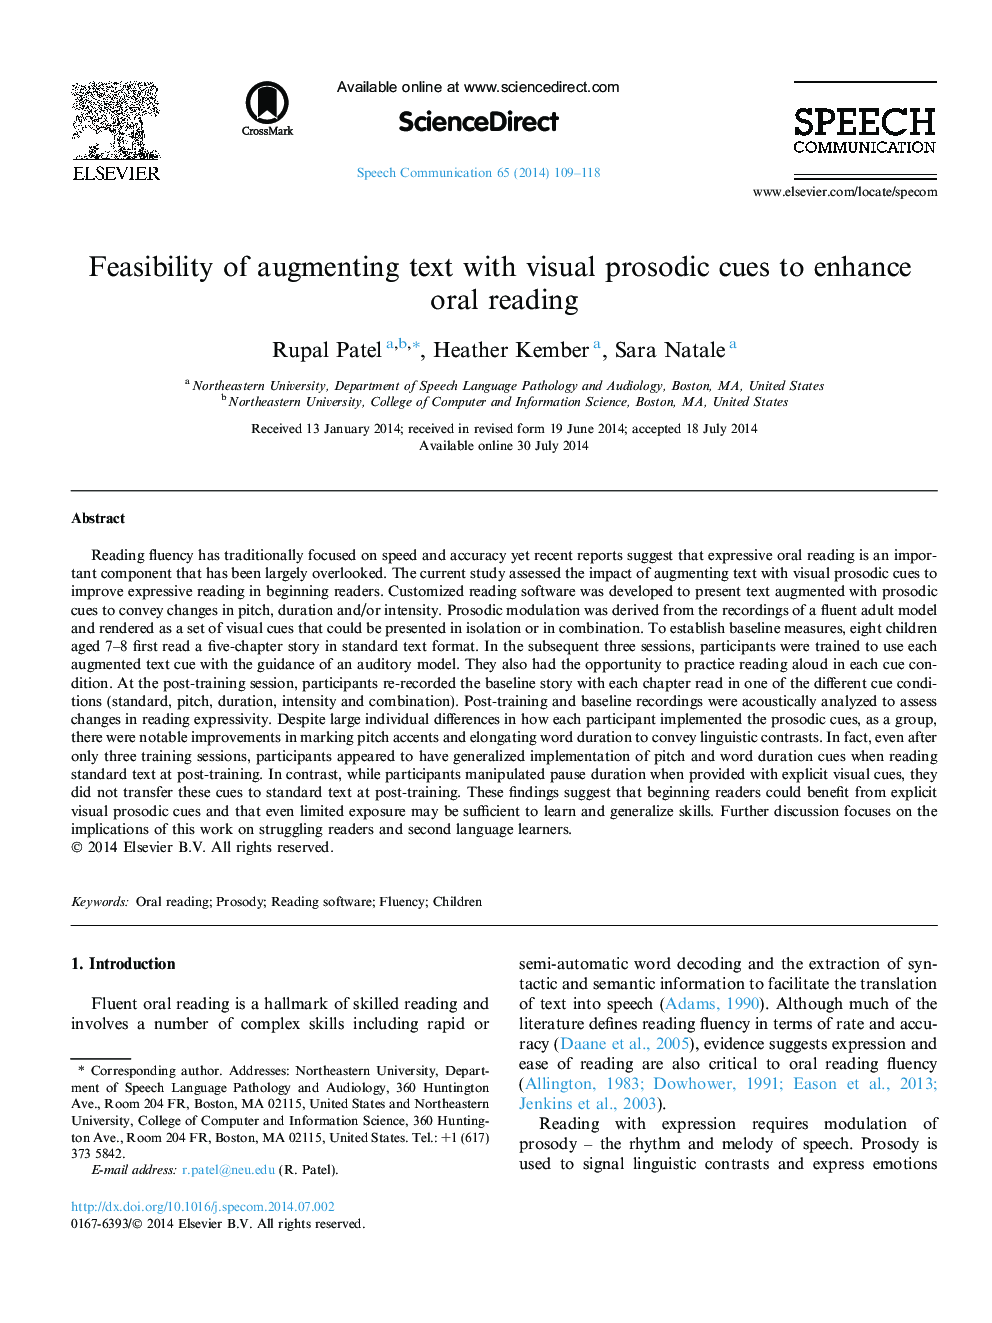 Feasibility of augmenting text with visual prosodic cues to enhance oral reading